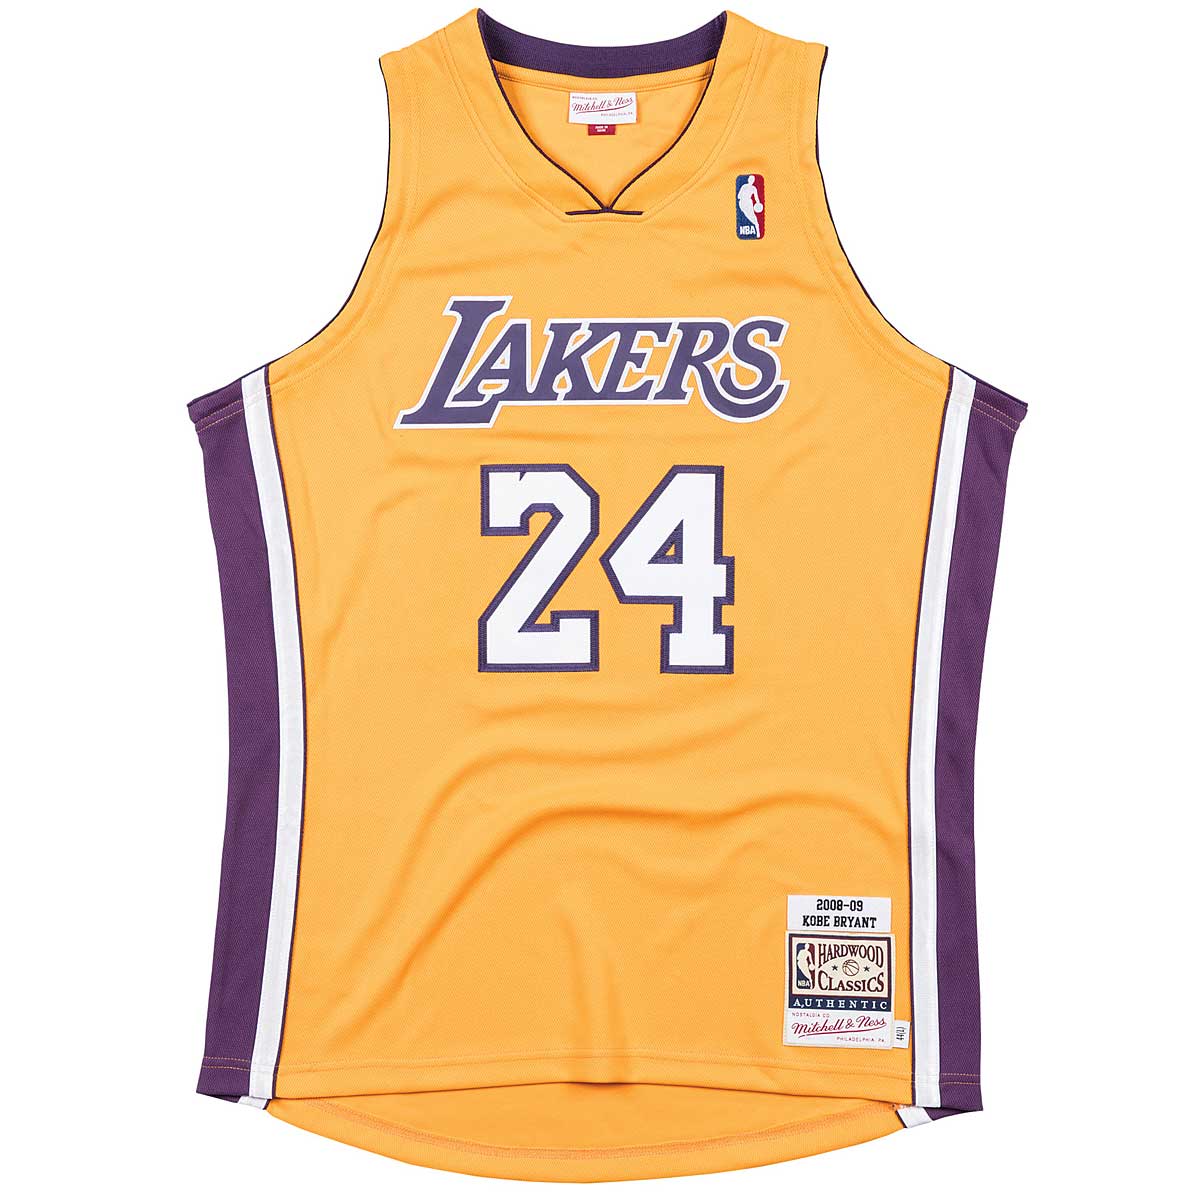 Image of Mitchell And Ness NBA Los Angeles Lakers Authentic Jersey - Kobe Bryant 2008 - 09, Yellow